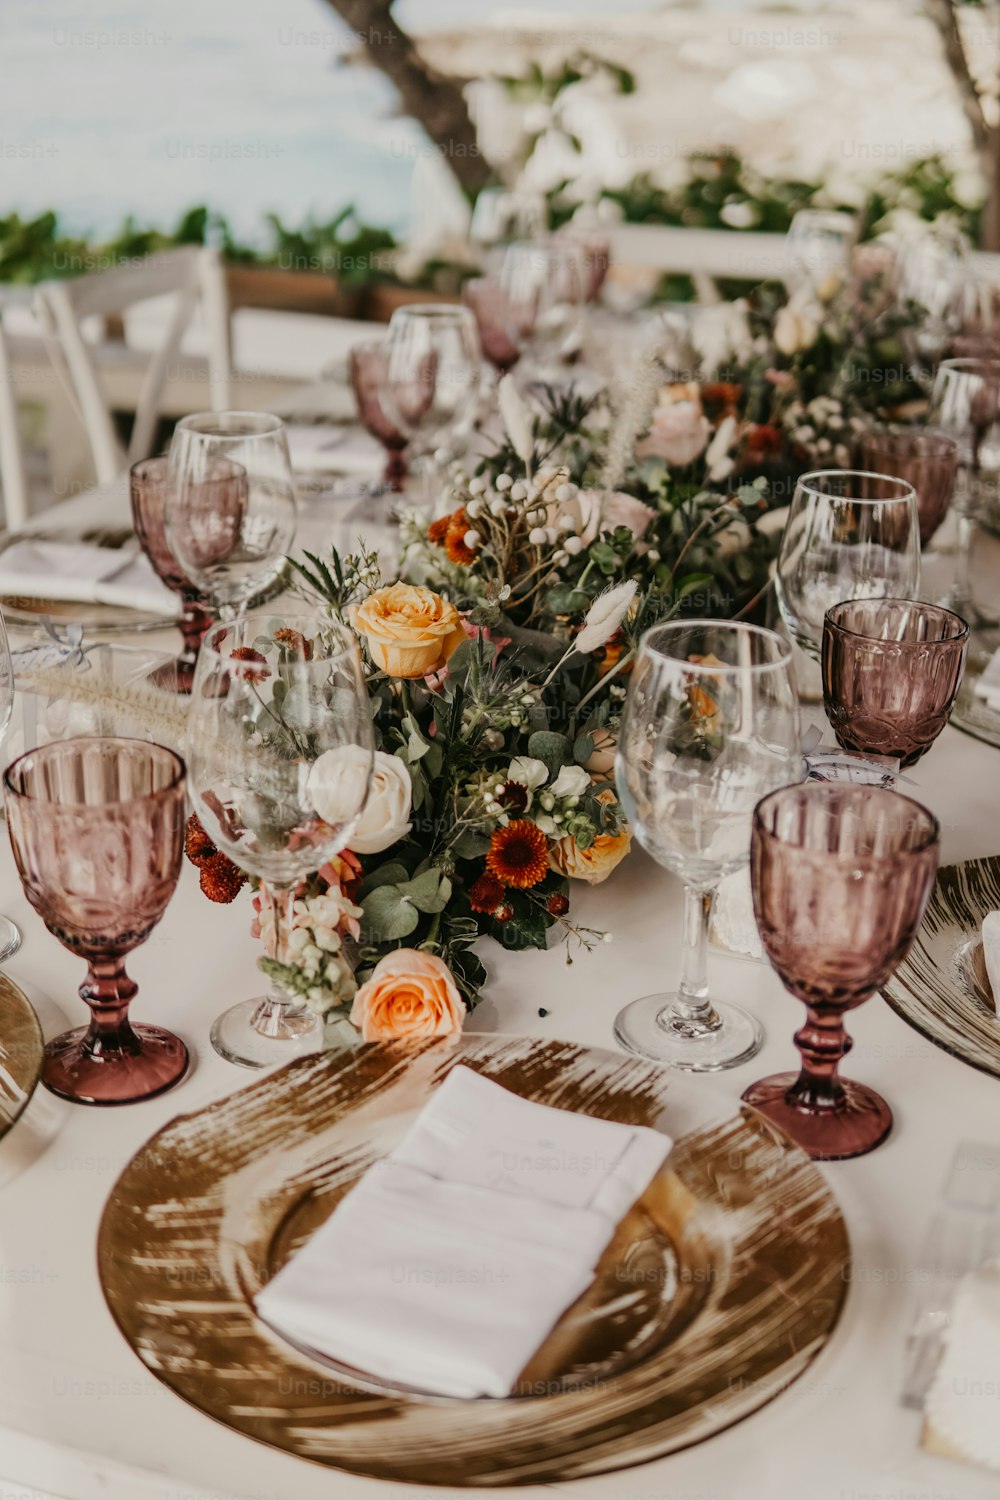 a table is set with wine glasses, plates and napkins